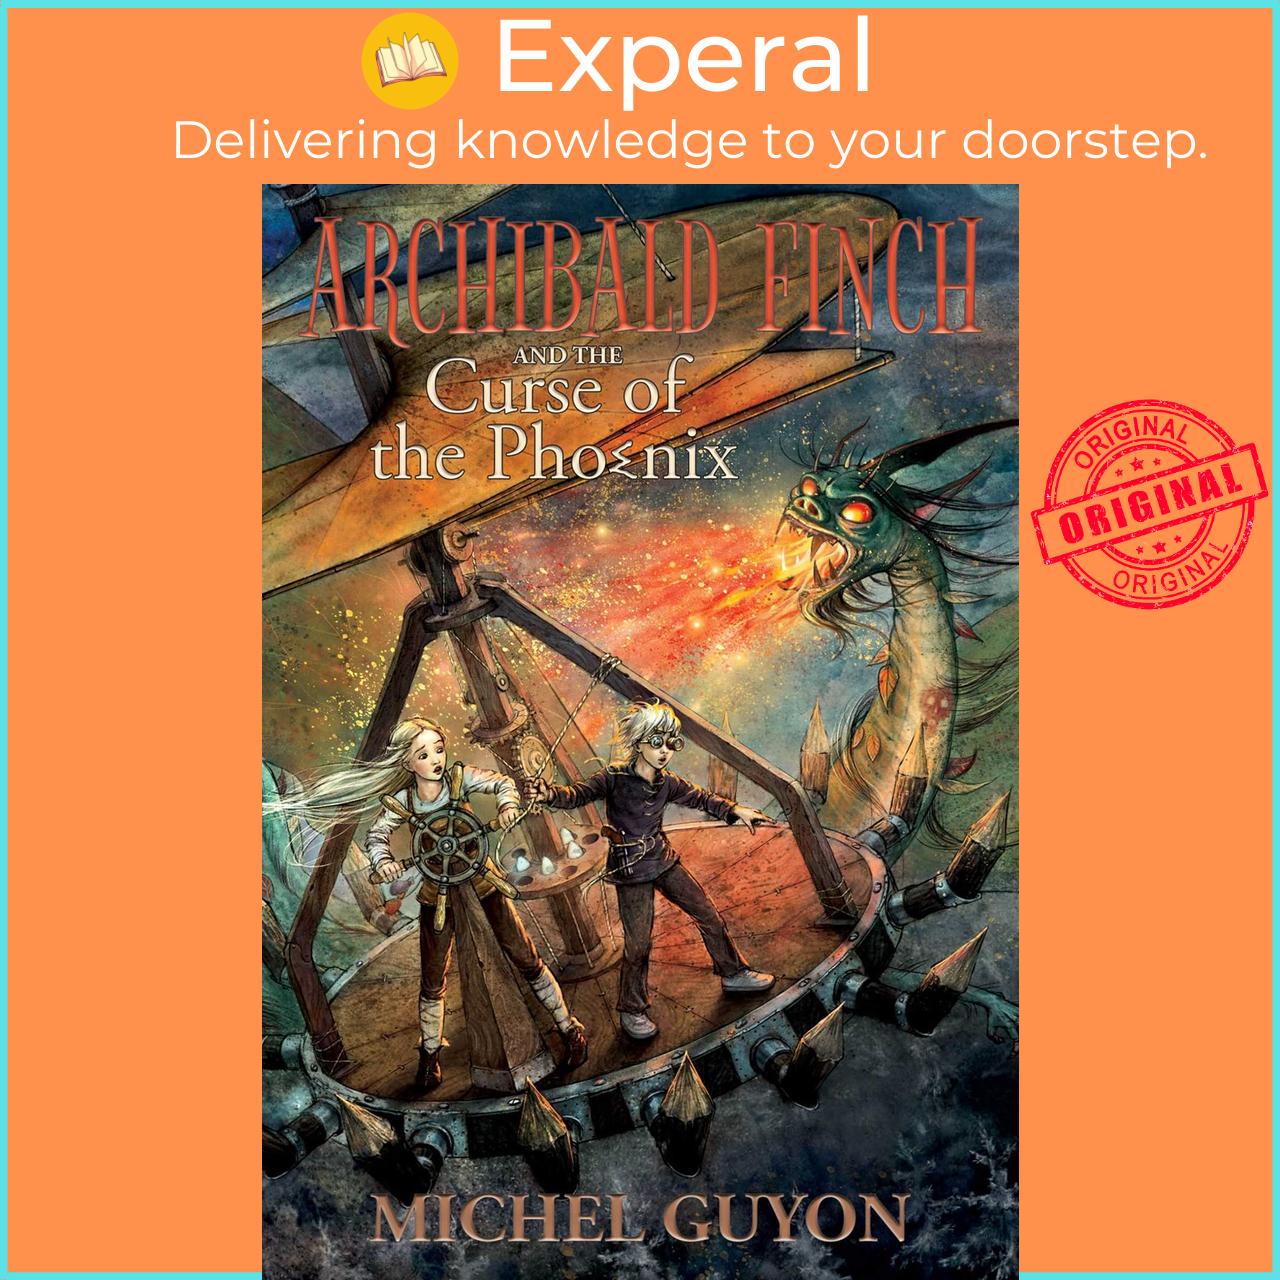 Sách - Archibald Finch and the Curse of the Phoenix by Michel Guyon (US edition, Hardcover)